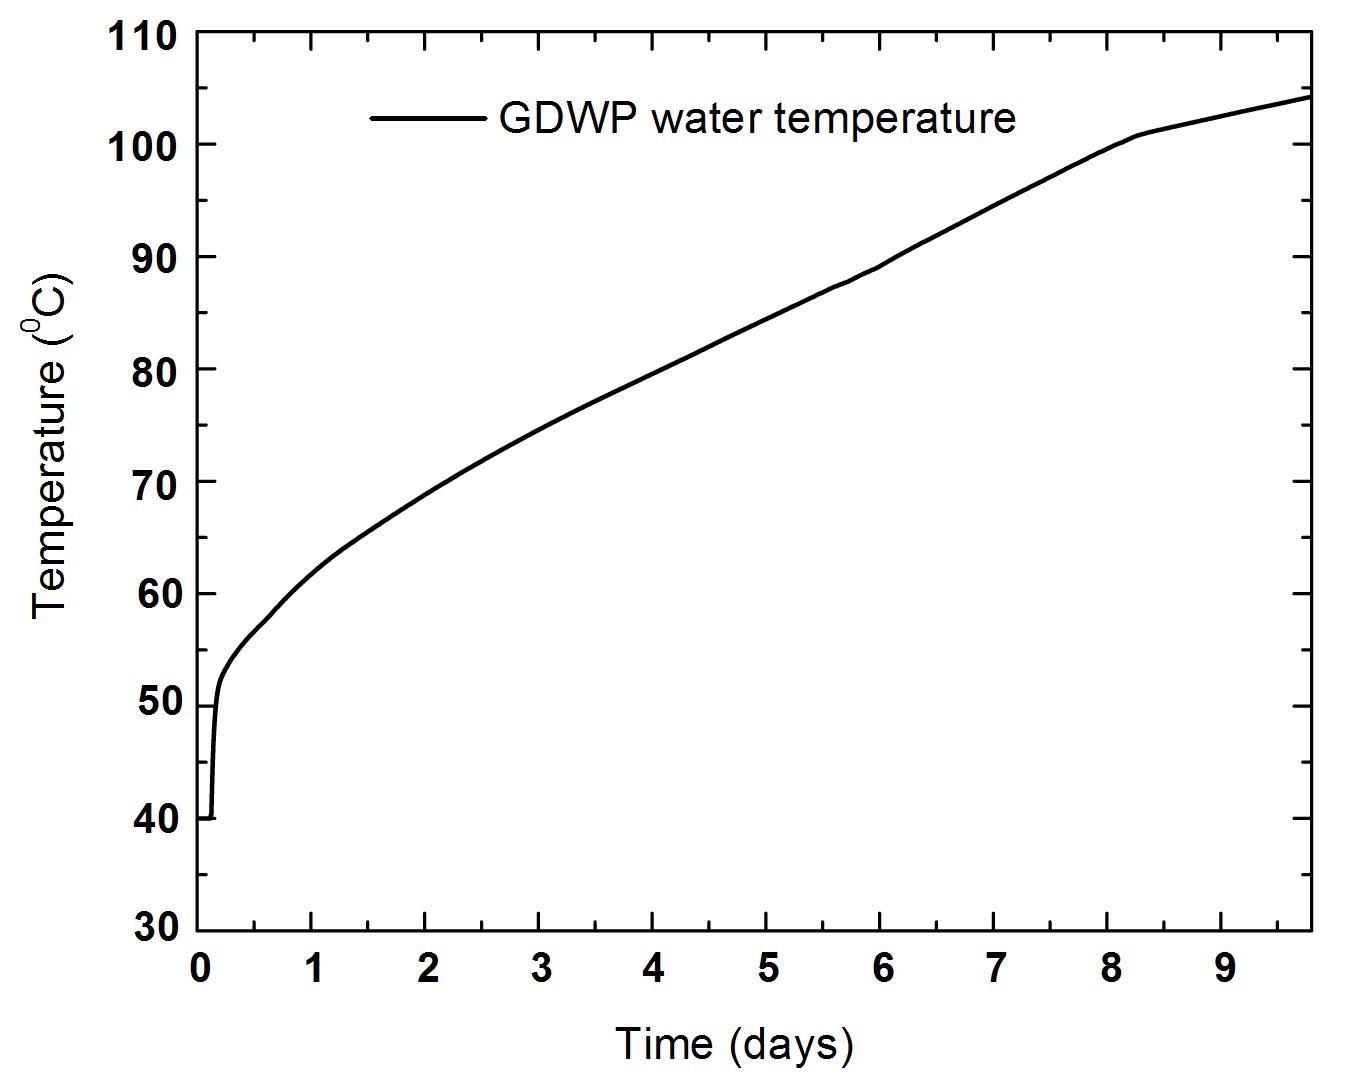 GDWP Water Temperature during Fukushima-like Accident